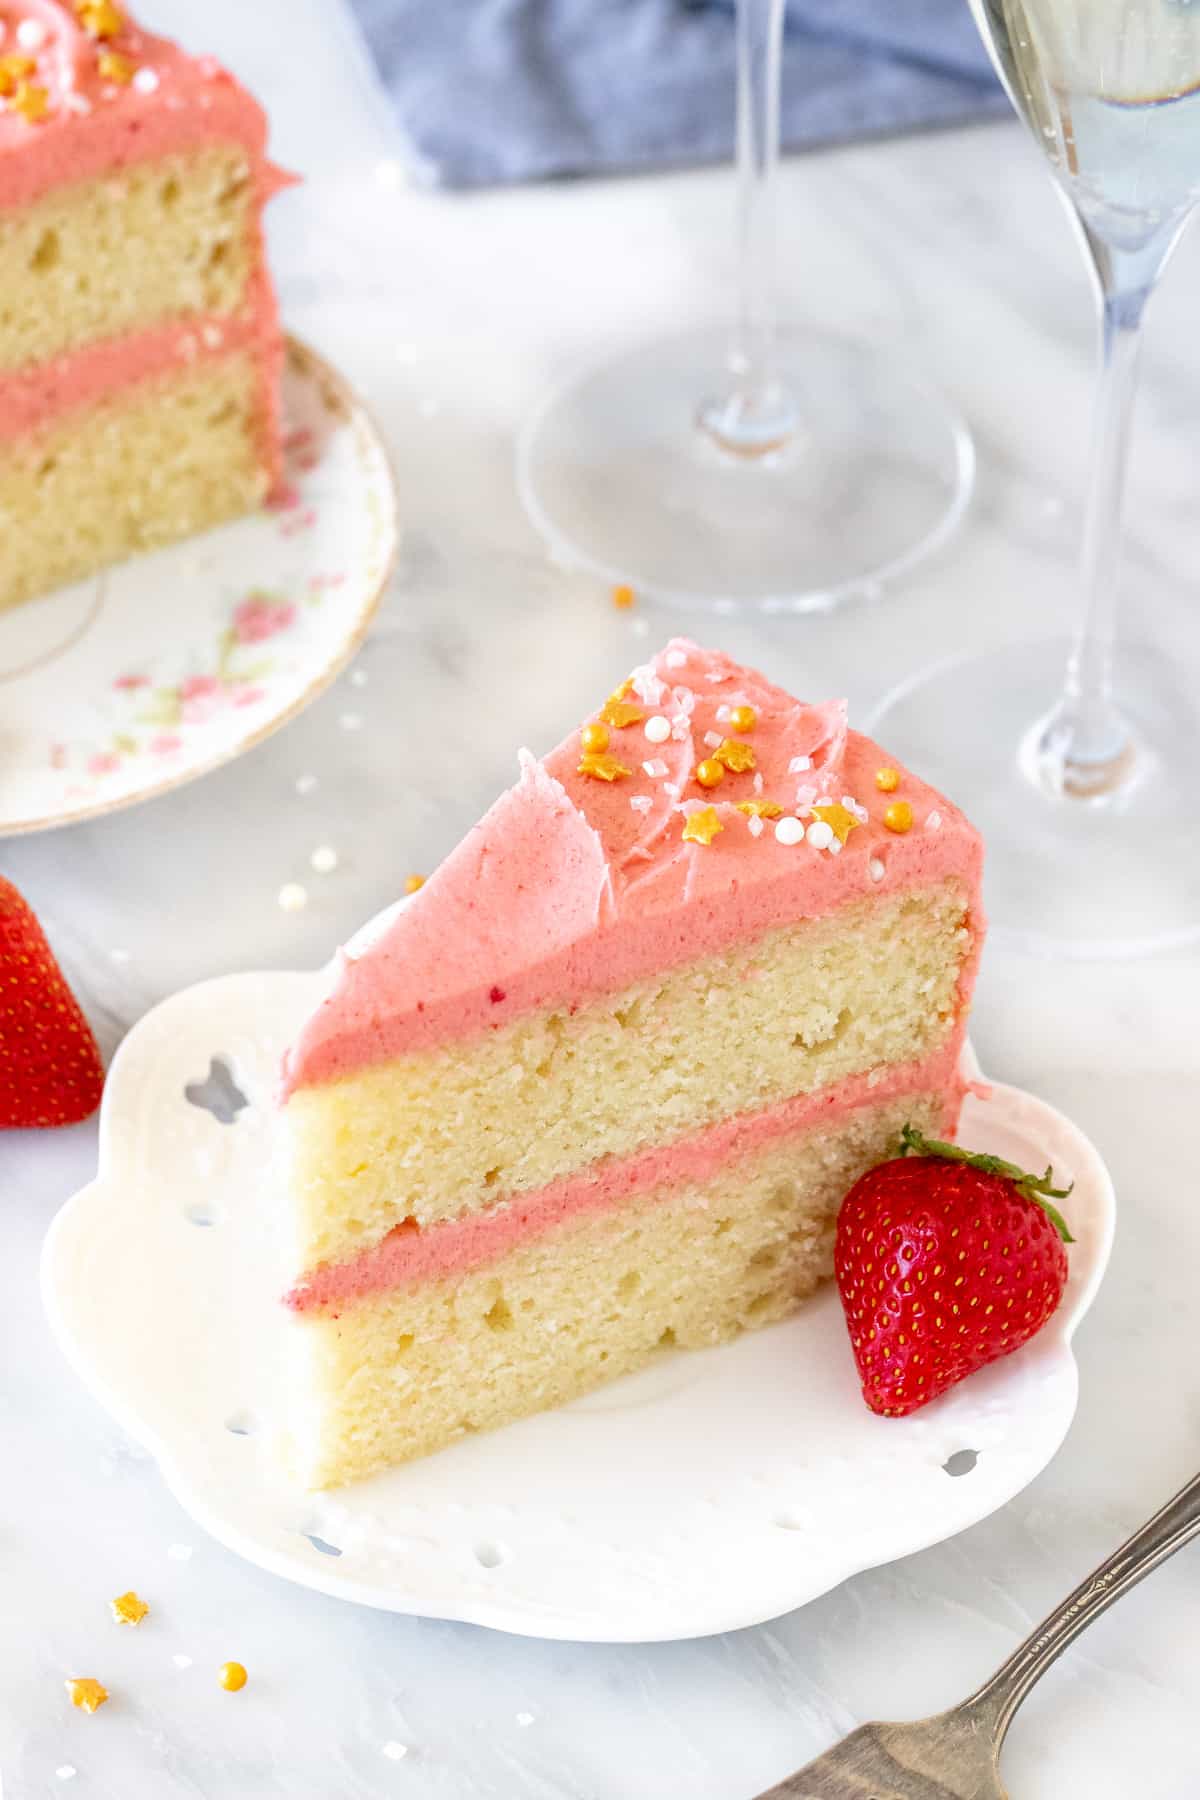 Slice of cake with pink frosting with 2 glasses of sparkling wine